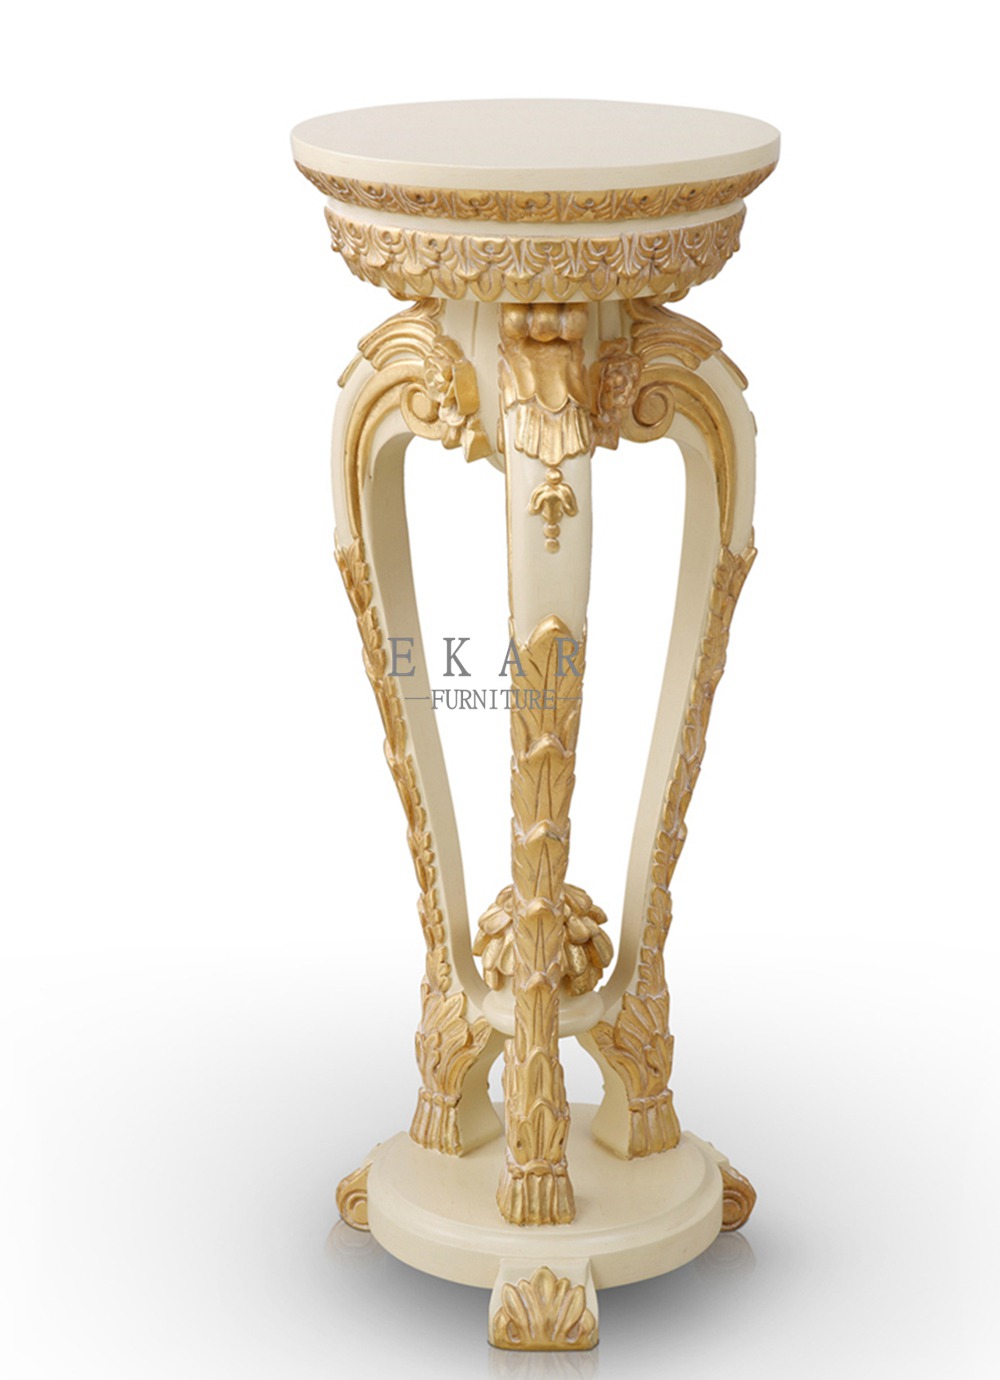 Elegant French Royal Style White and Gold Wooden Flower Stand